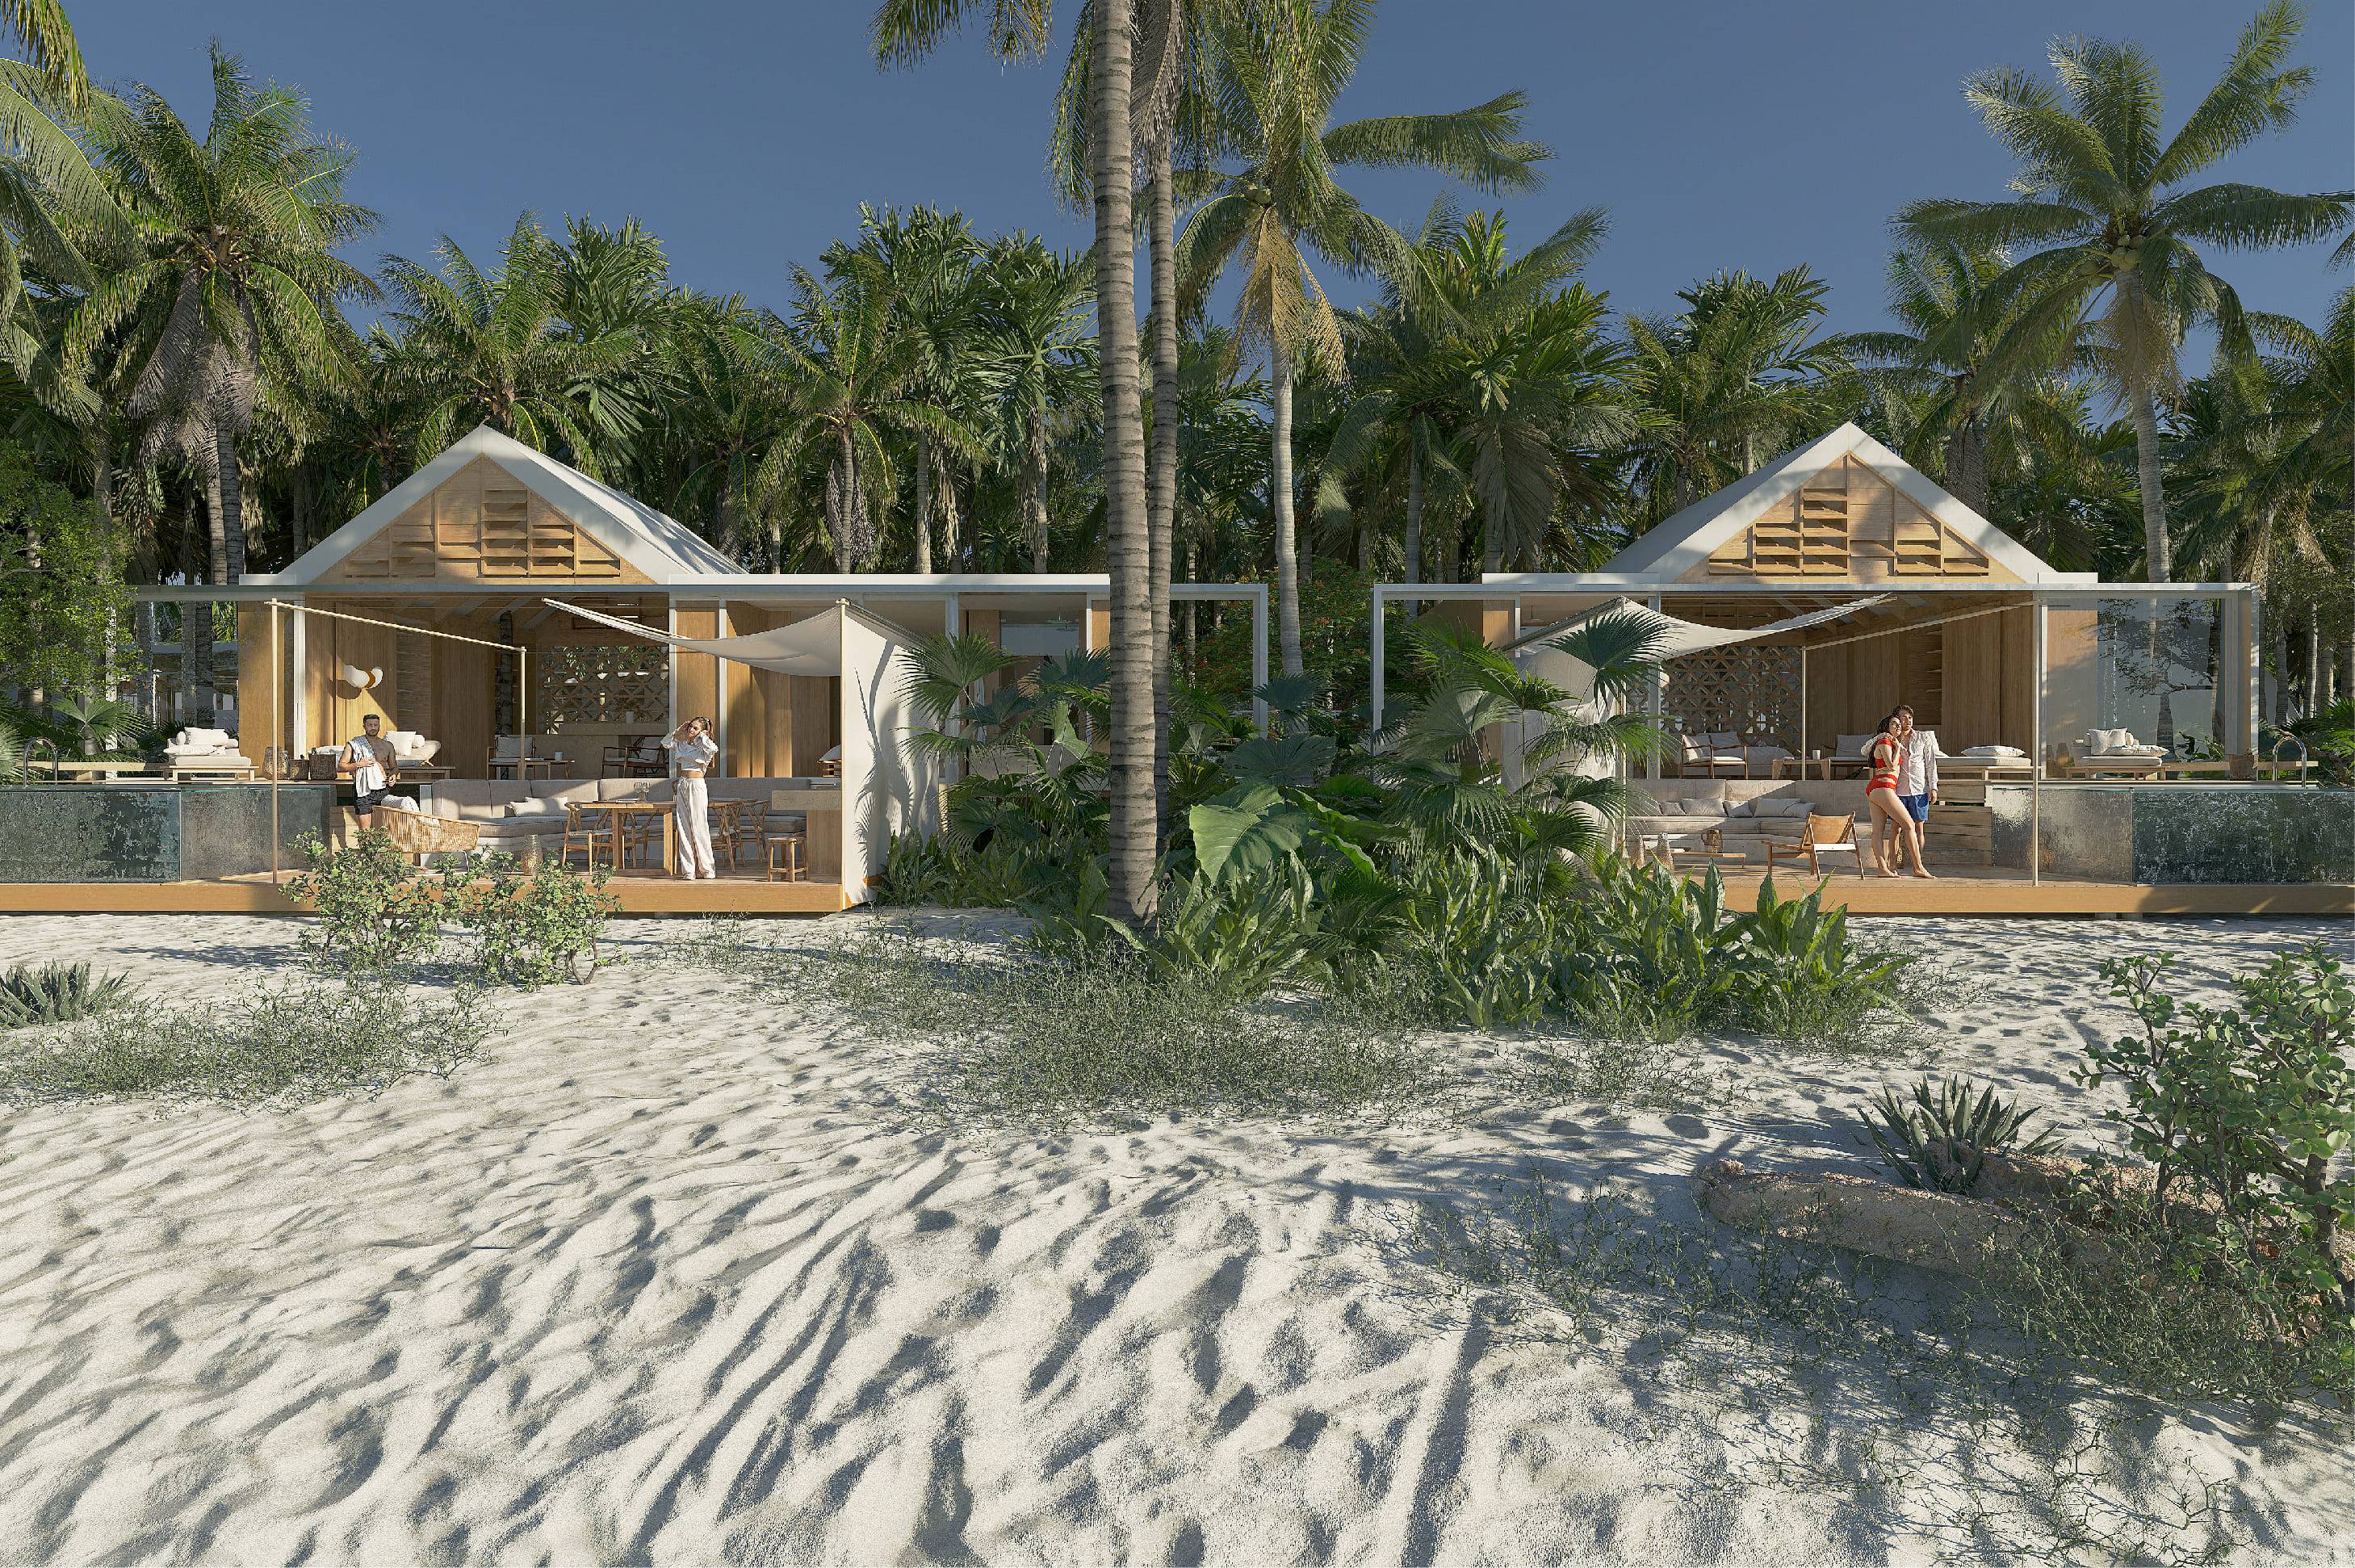 SIGNATURE TWO BEDROOM VILLA​​​​​​​ at the first dedicated 5-Star Resort-Residence in the Maldives